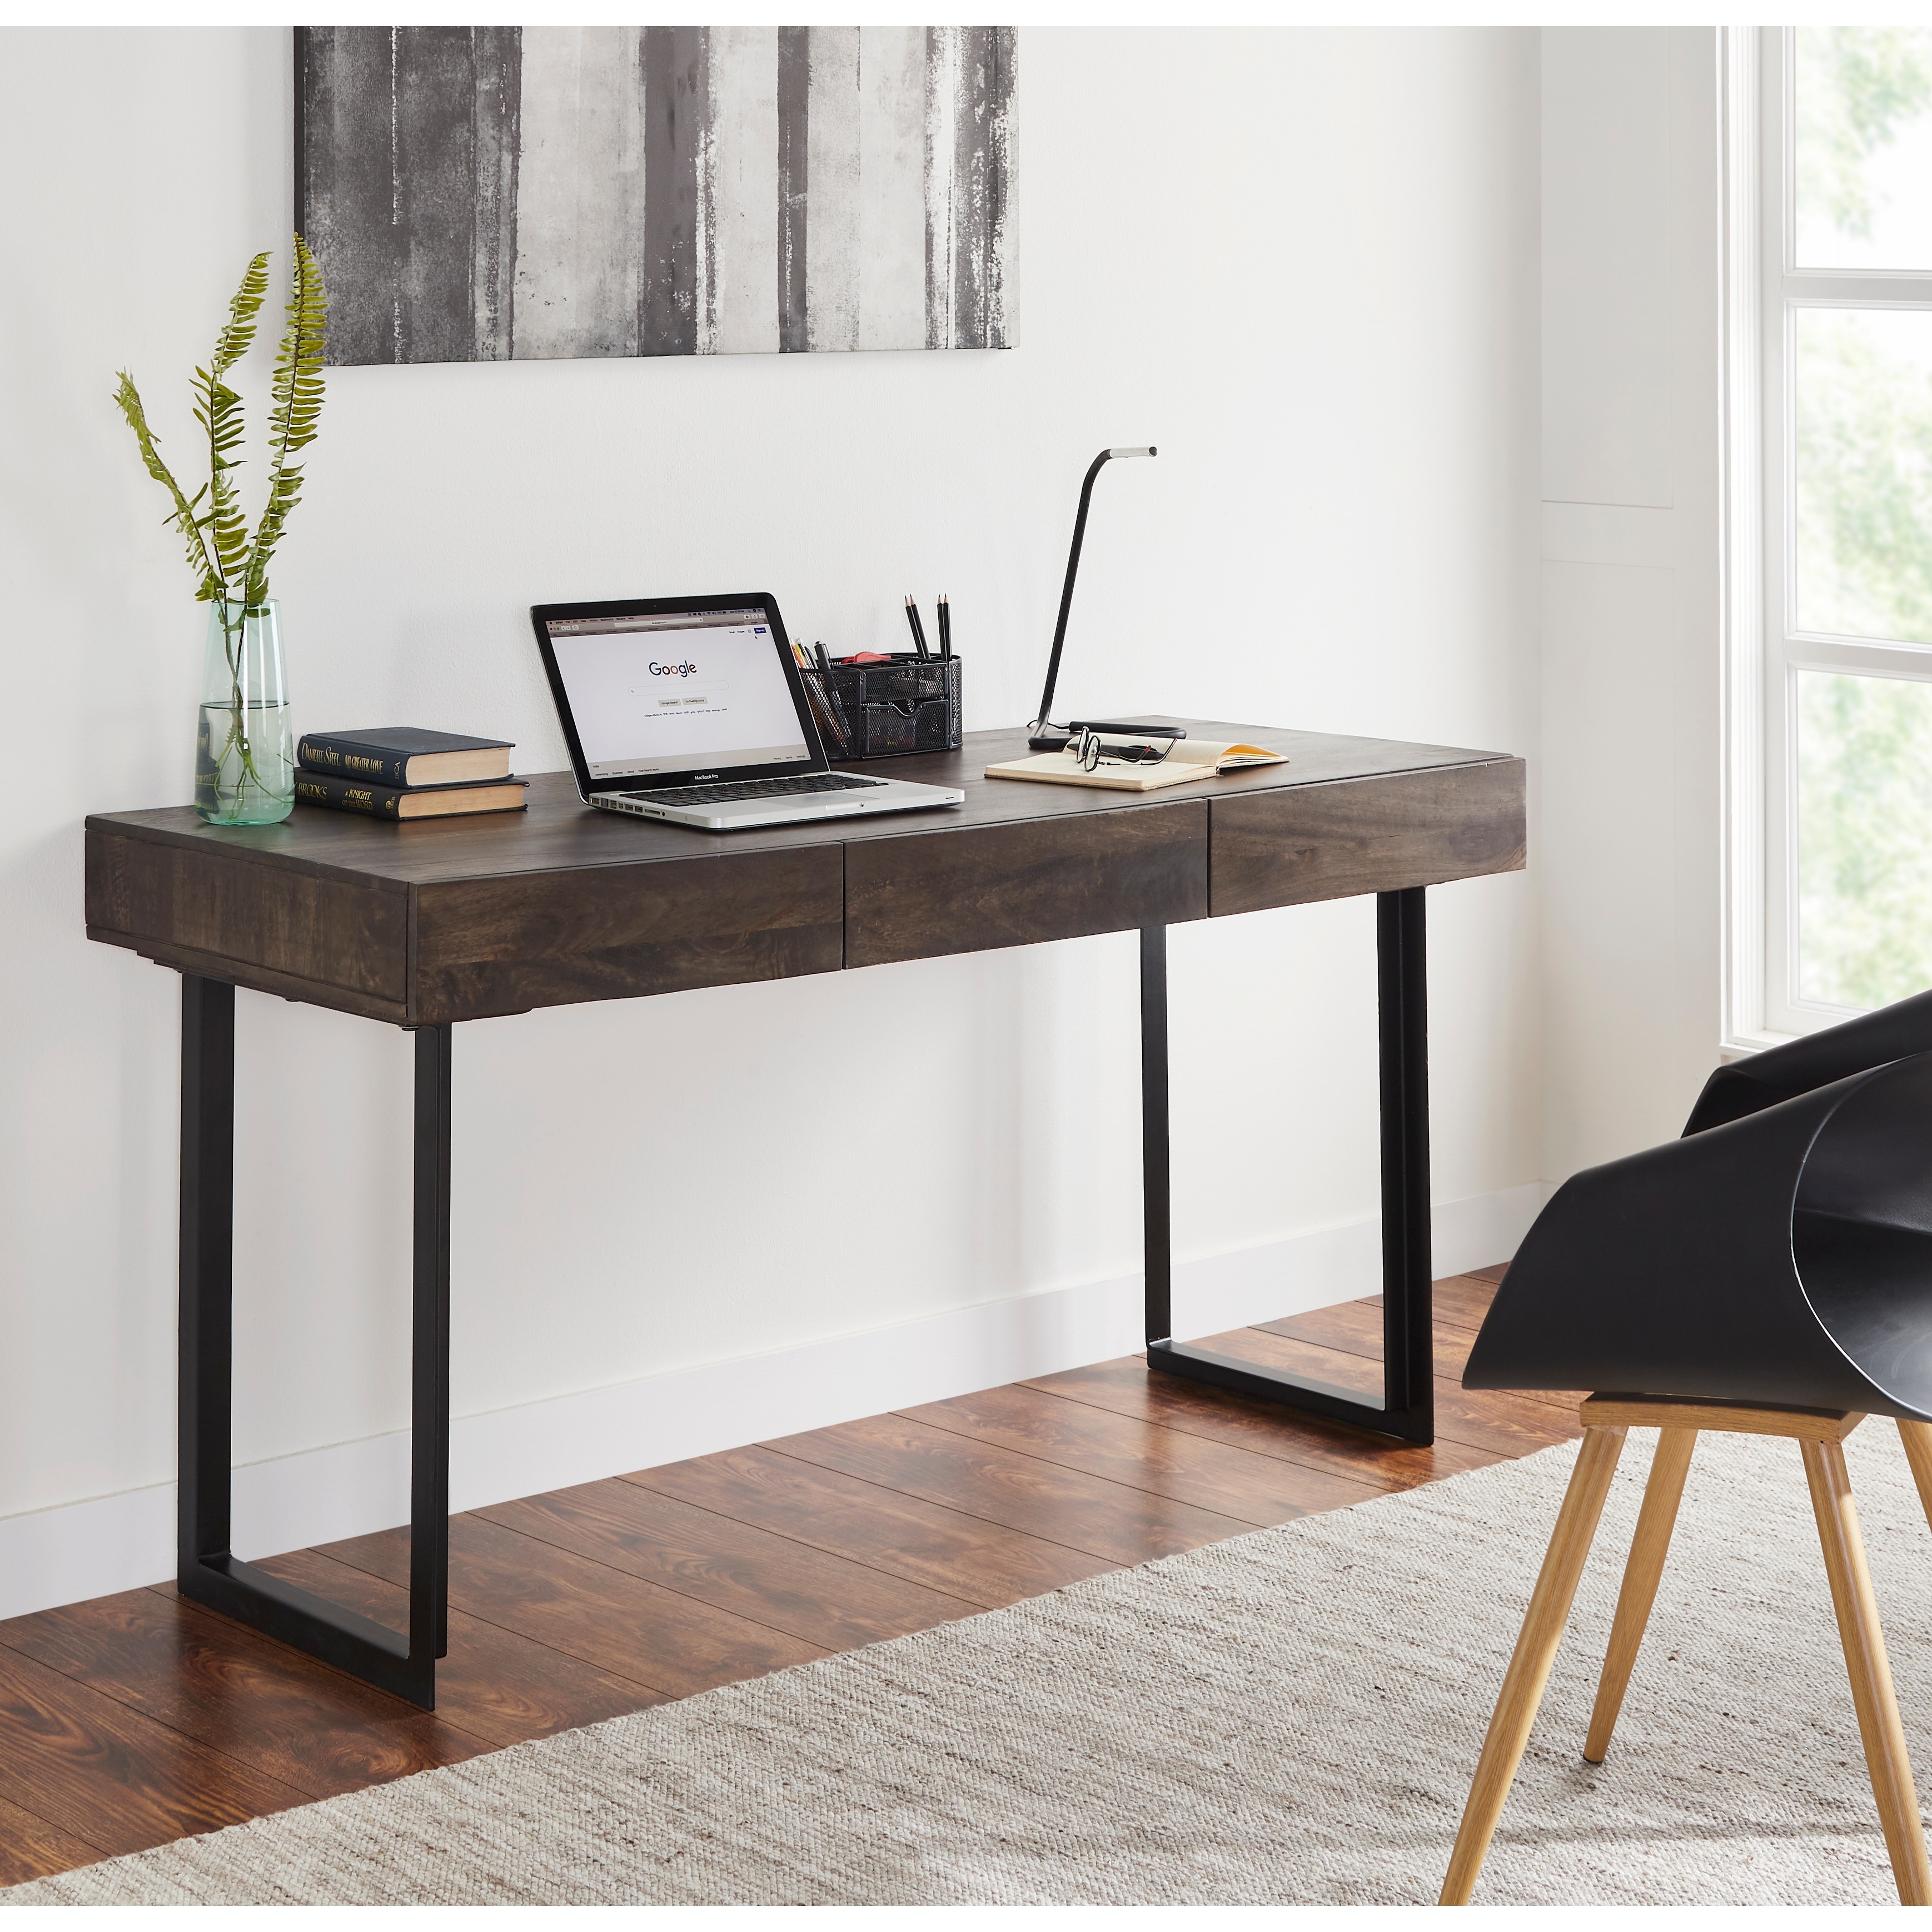 https://ak1.ostkcdn.com/images/products/is/images/direct/4864b8b9413ce07b9f786685fba56880888b713d/Glide-Office-Desk-with-Storage-Modern-and-Contemporary.jpg